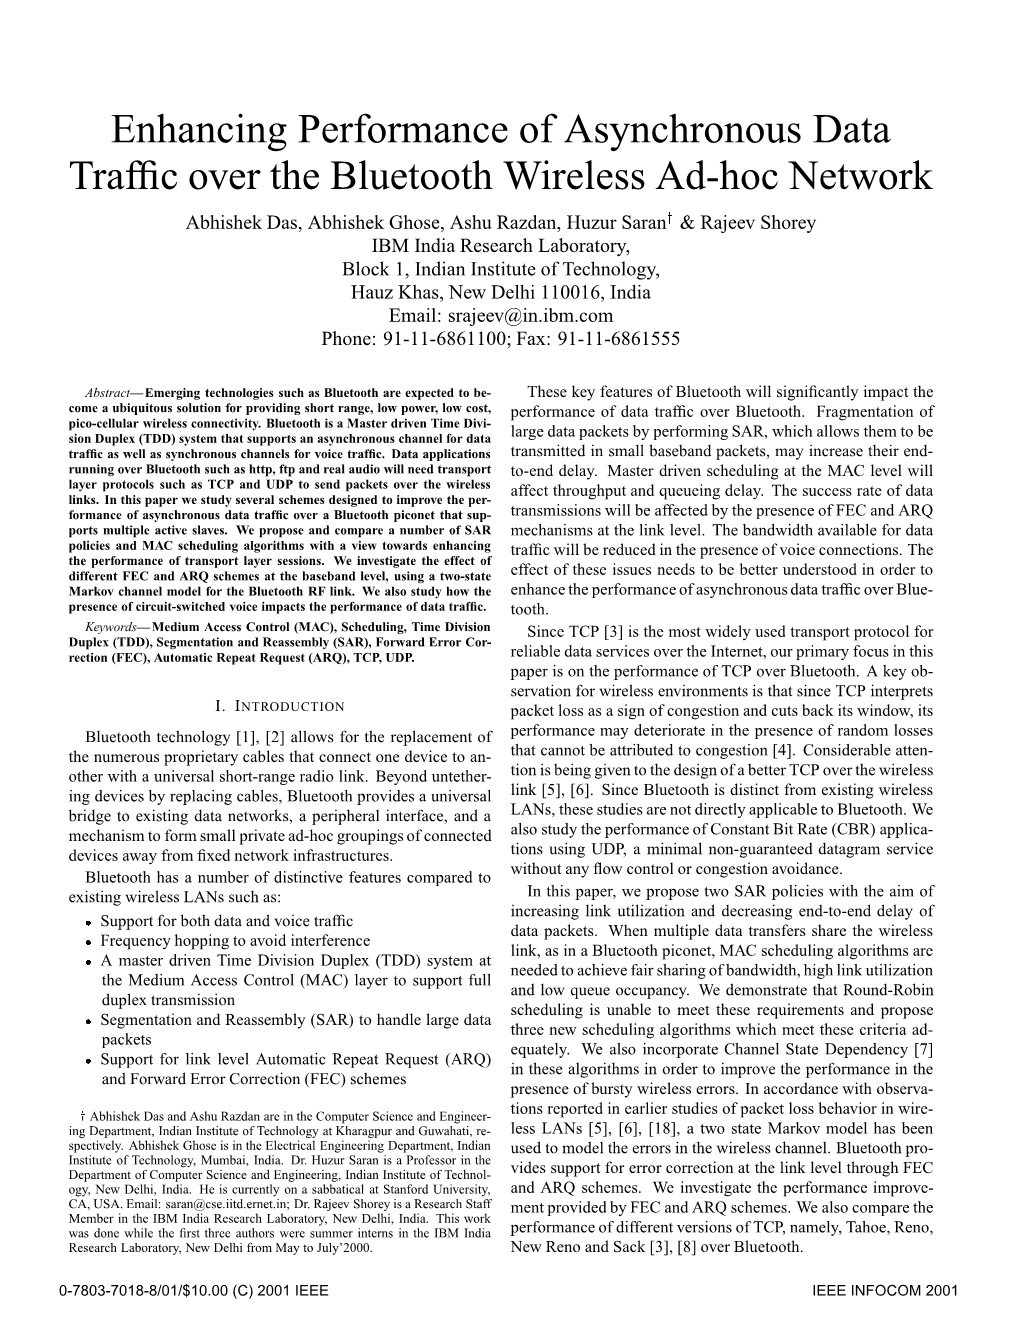 Enhancing Performance of Asynchronous Data Traffic Over The